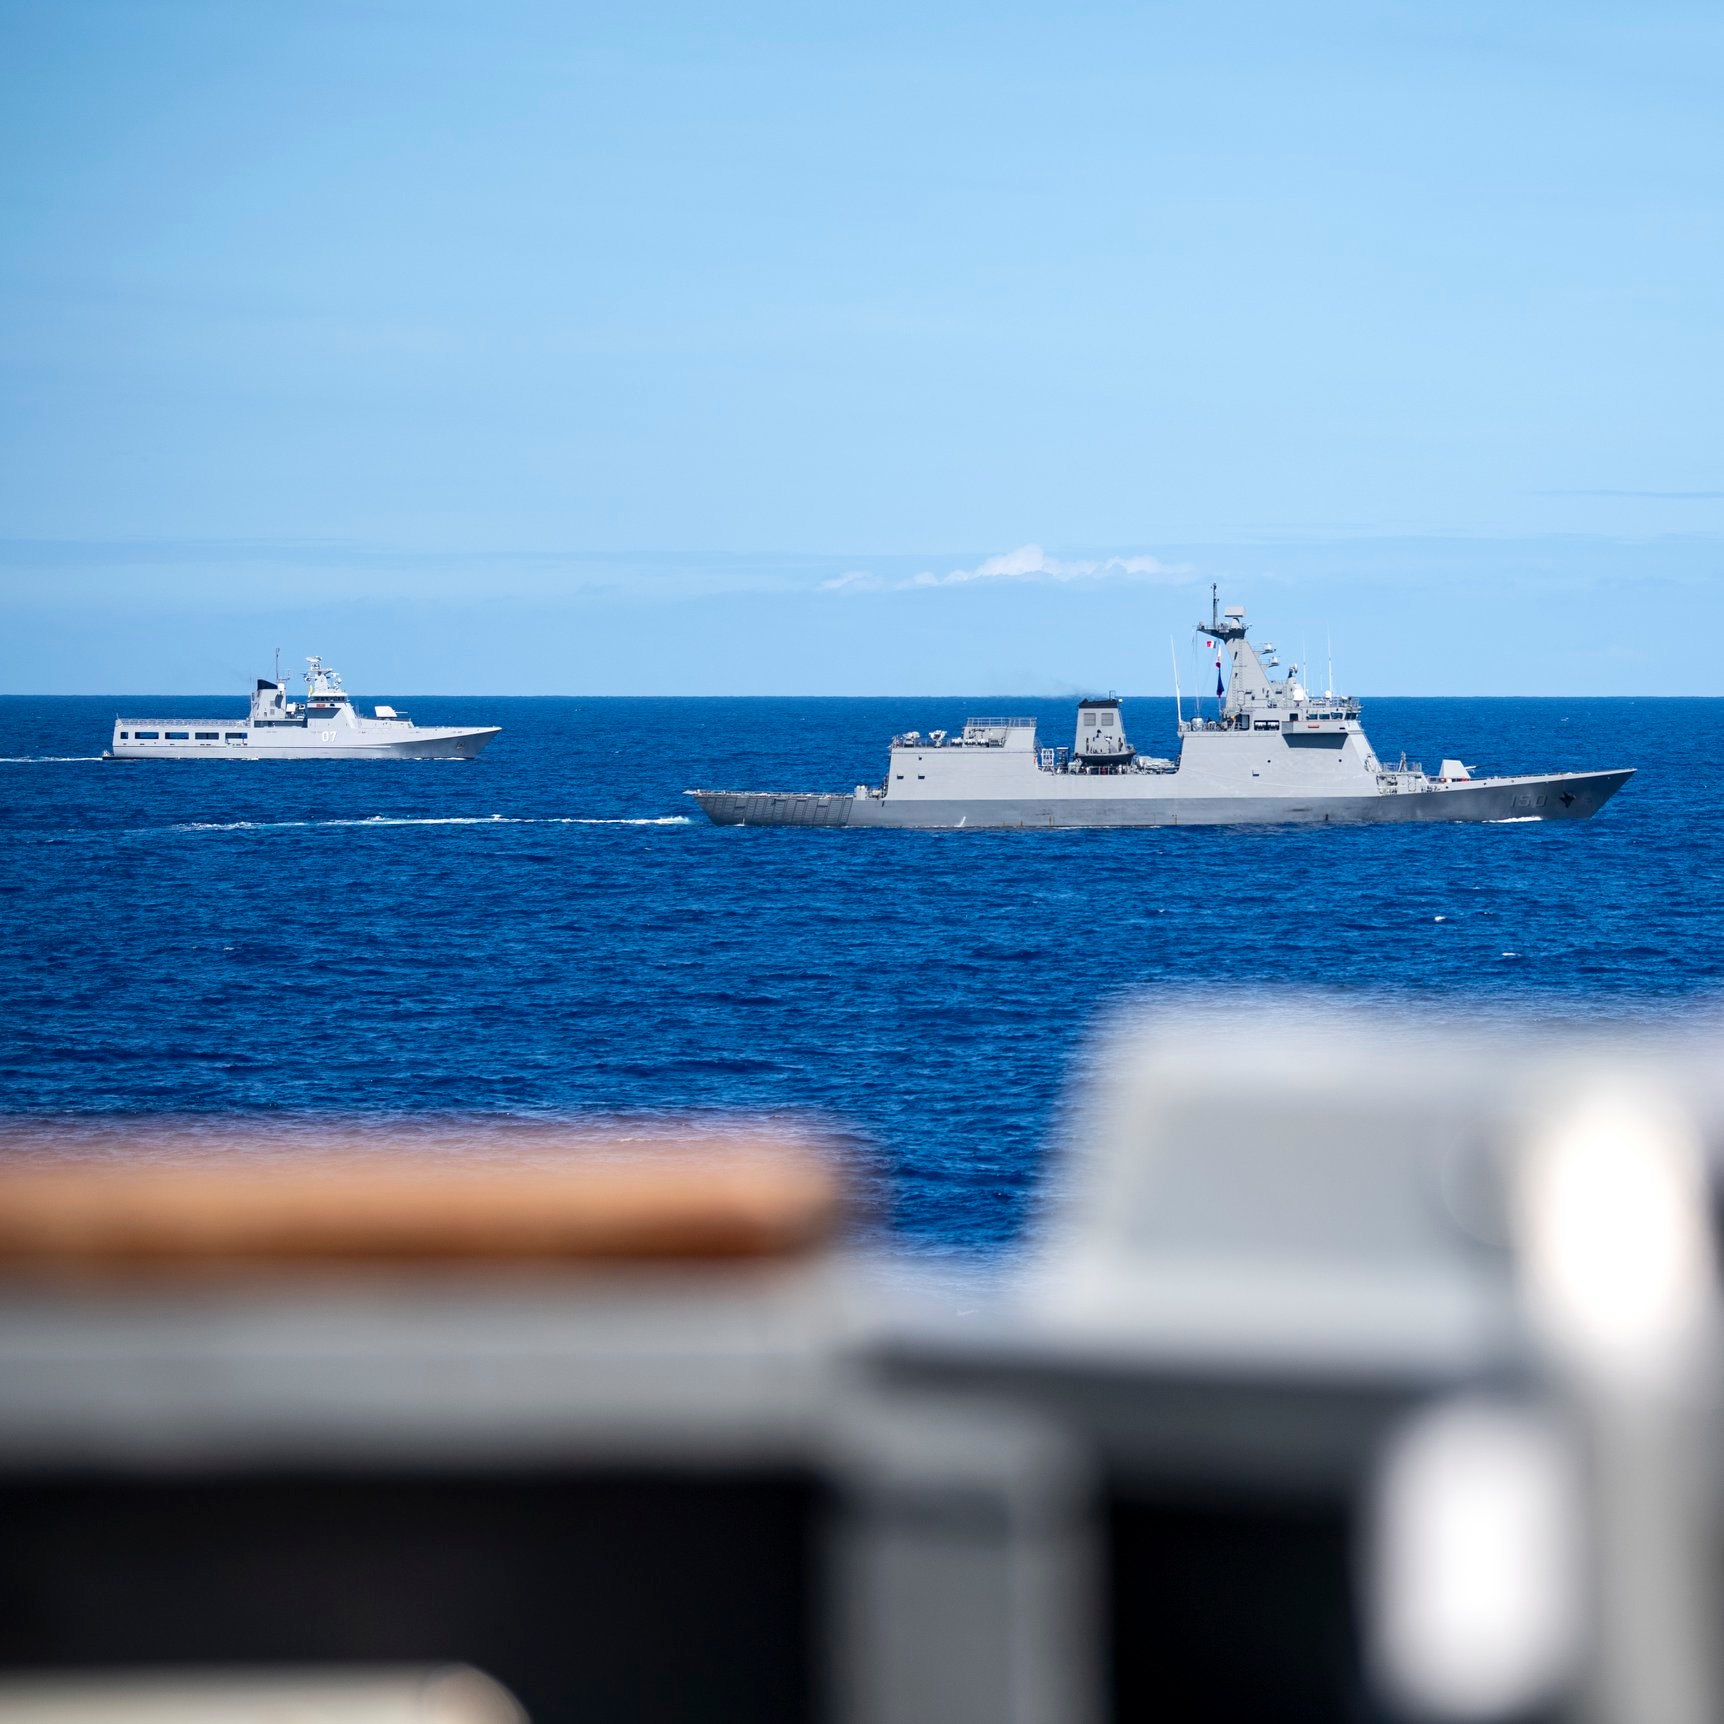 Philippine Navy frigate BRP Jose Rizal (FF 150) and Royal Brunei Navy offshore patrol vessel KDB Darulehsan (OPV 07) sail alongside USS Chung-Hoon (DDG 93) as part of a group sail following exercise Rim of the Pacific 2020. (U.S. Navy photo by Mass Communication Specialist 1st Class Devin M. Langer)